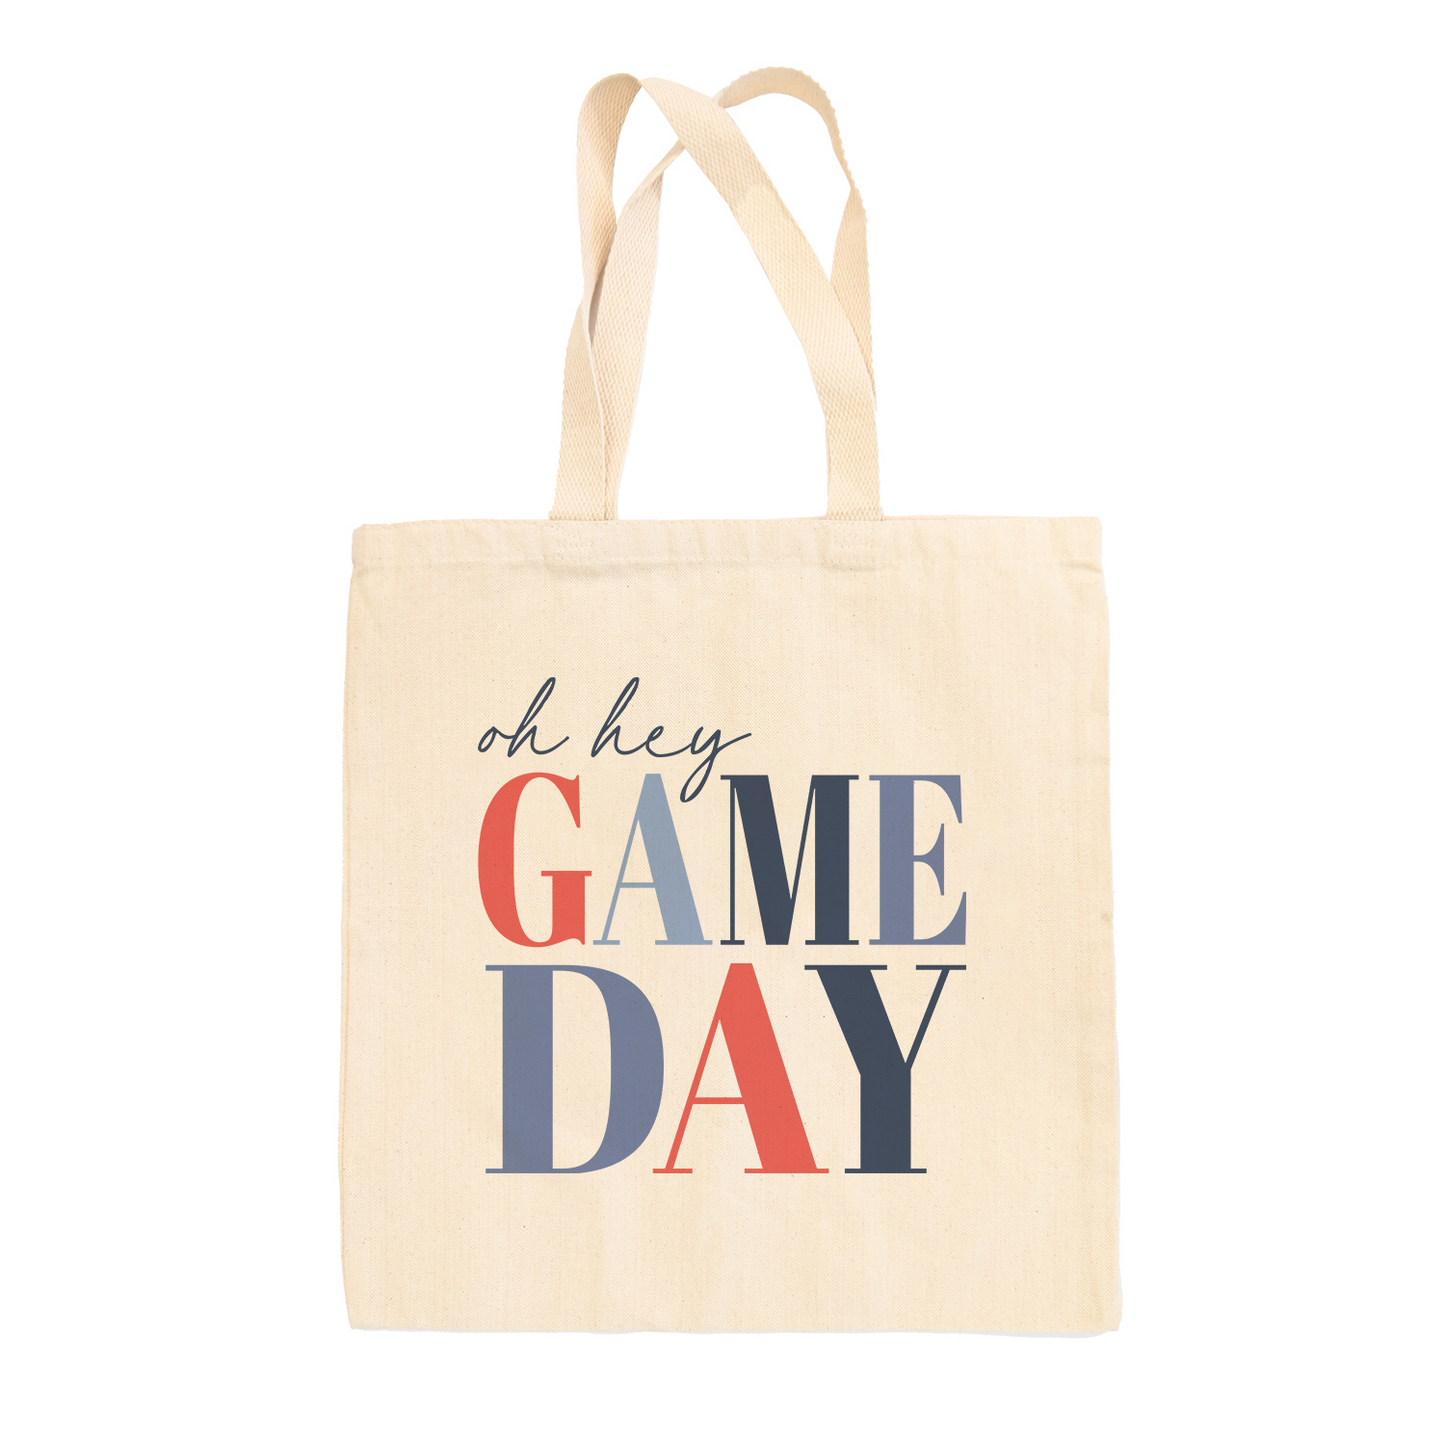 Oh Hey Game Day Tote Bag